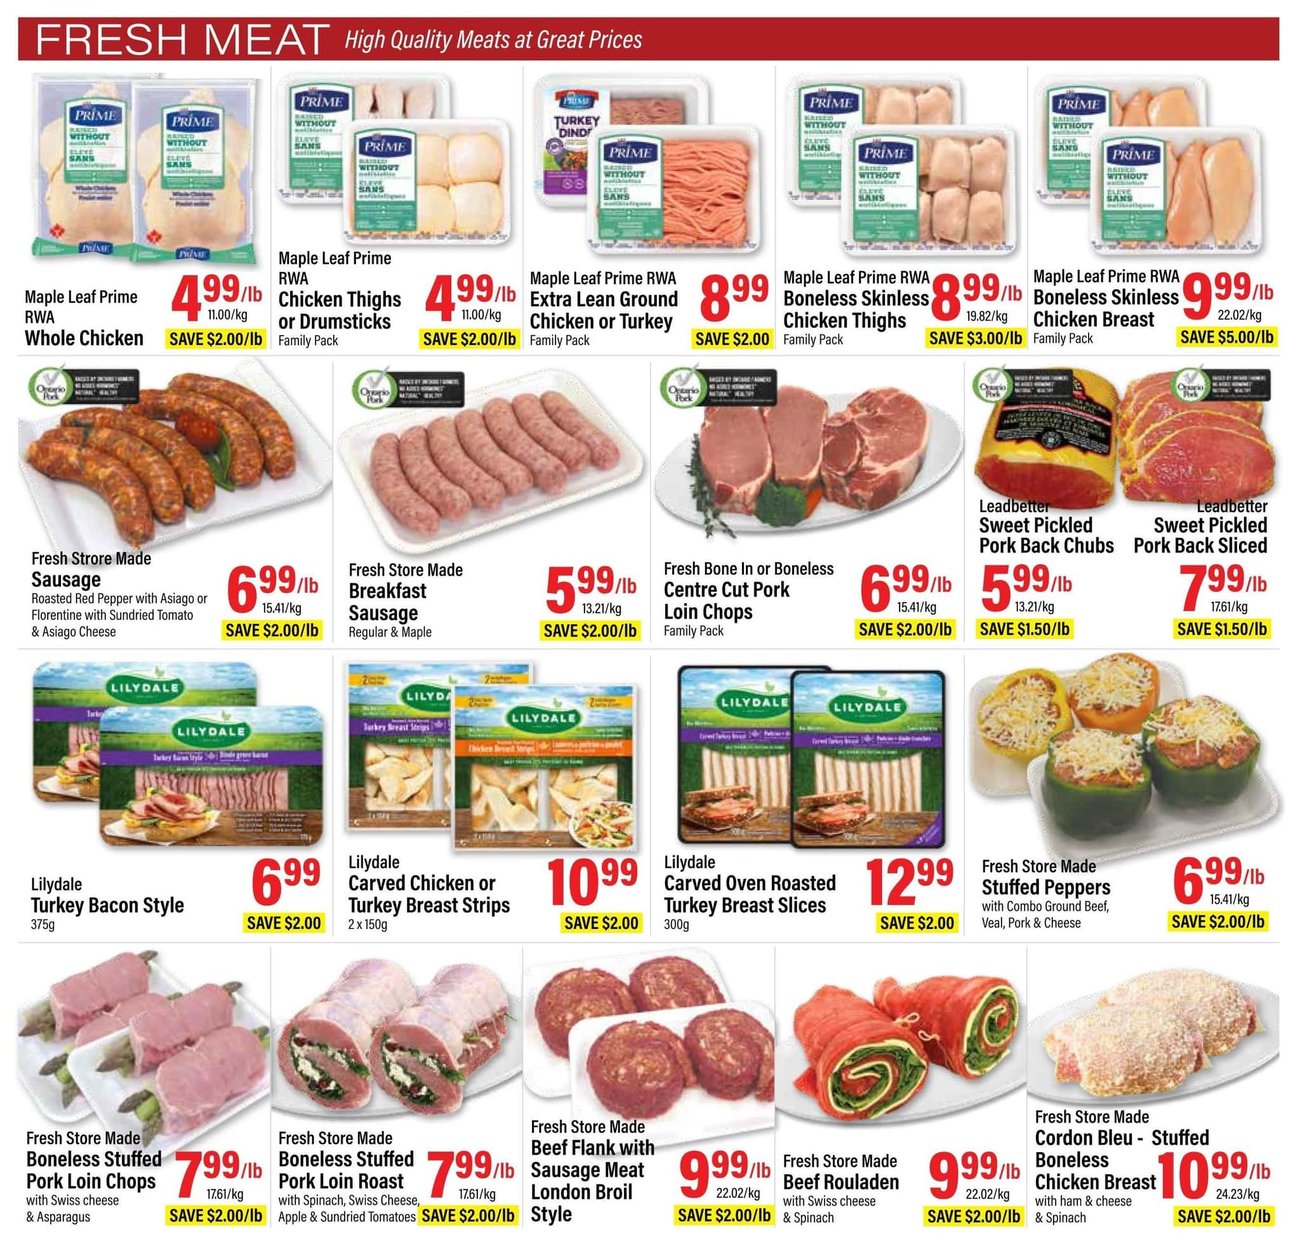 Commisso's Fresh Foods - Weekly Flyer Specials - Page 2